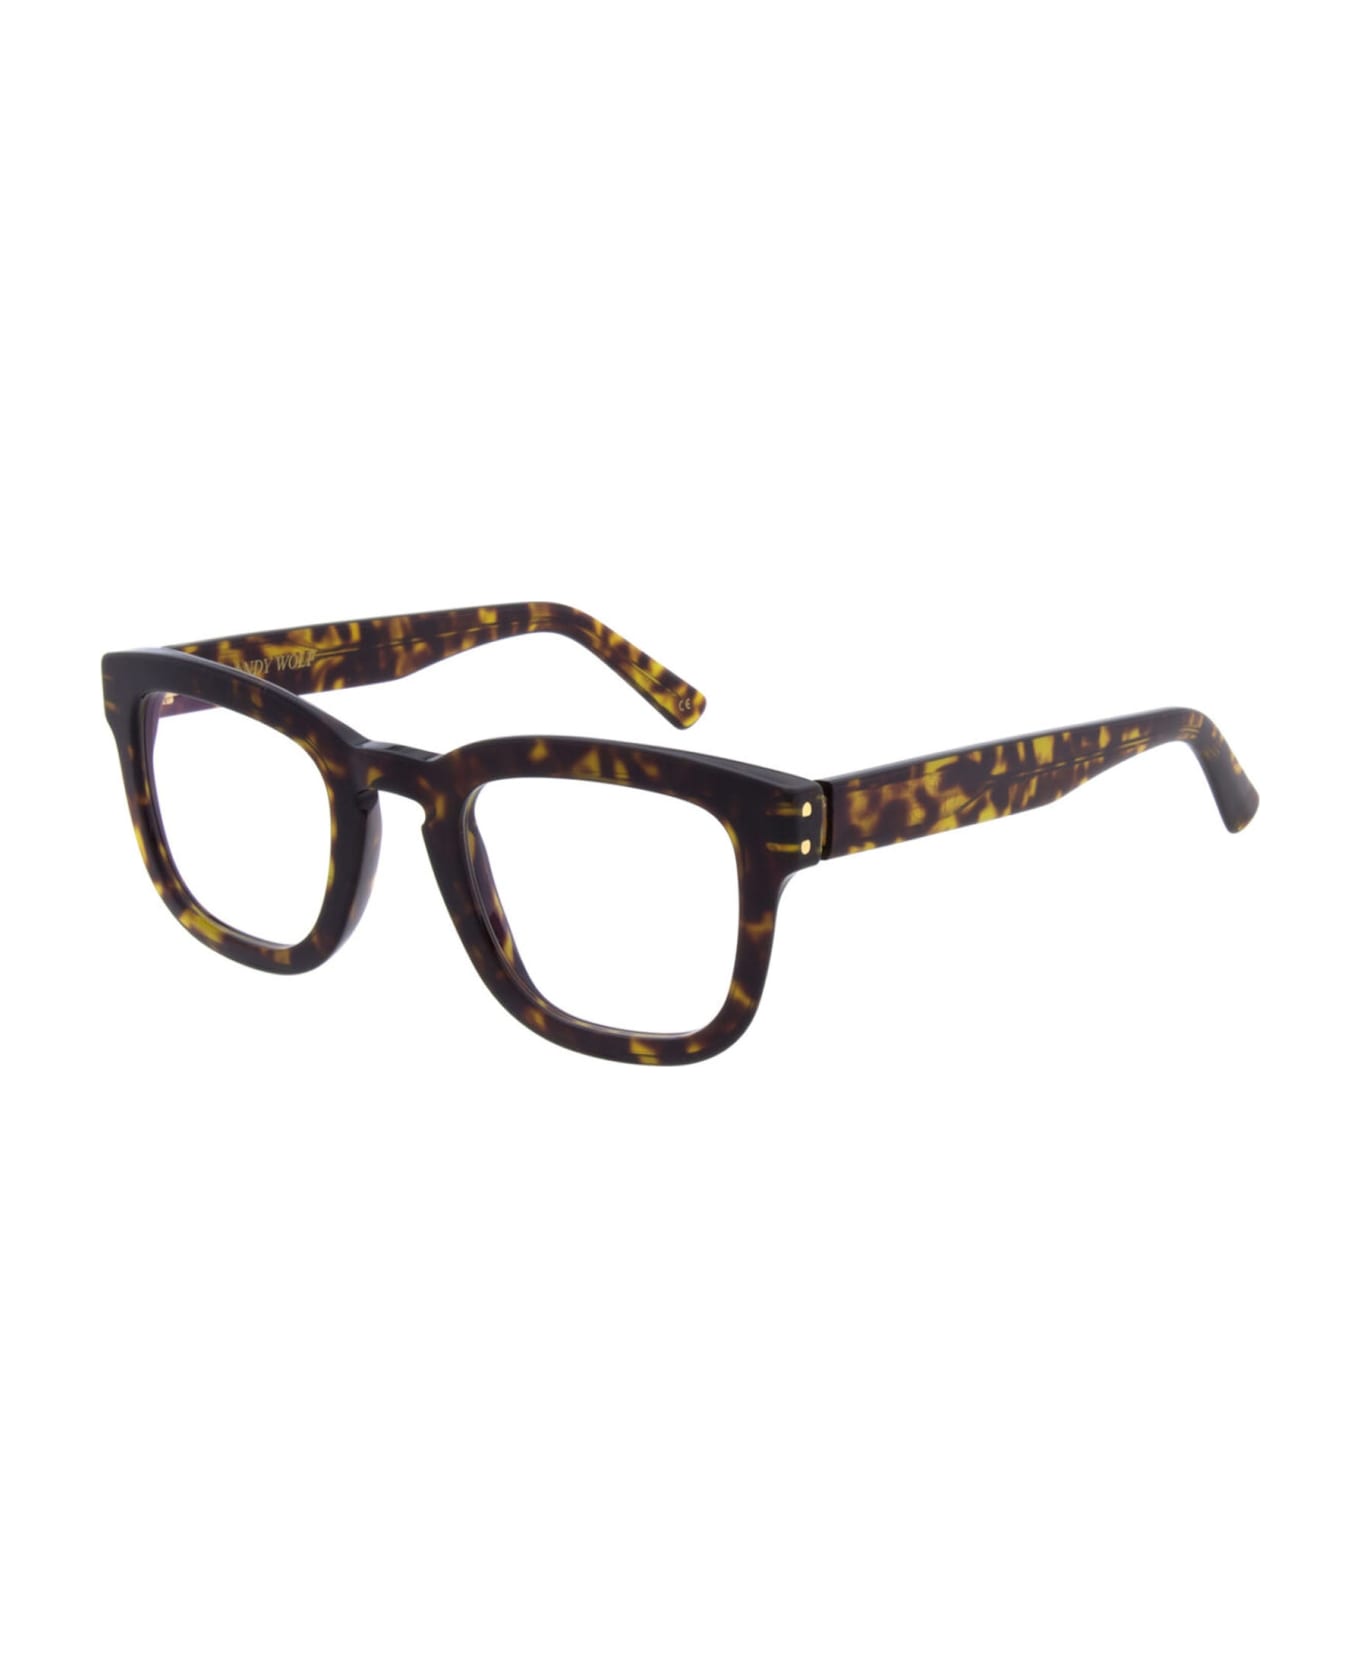 Andy Wolf Aw01 - Brown / Gold Glasses - brown tortoise